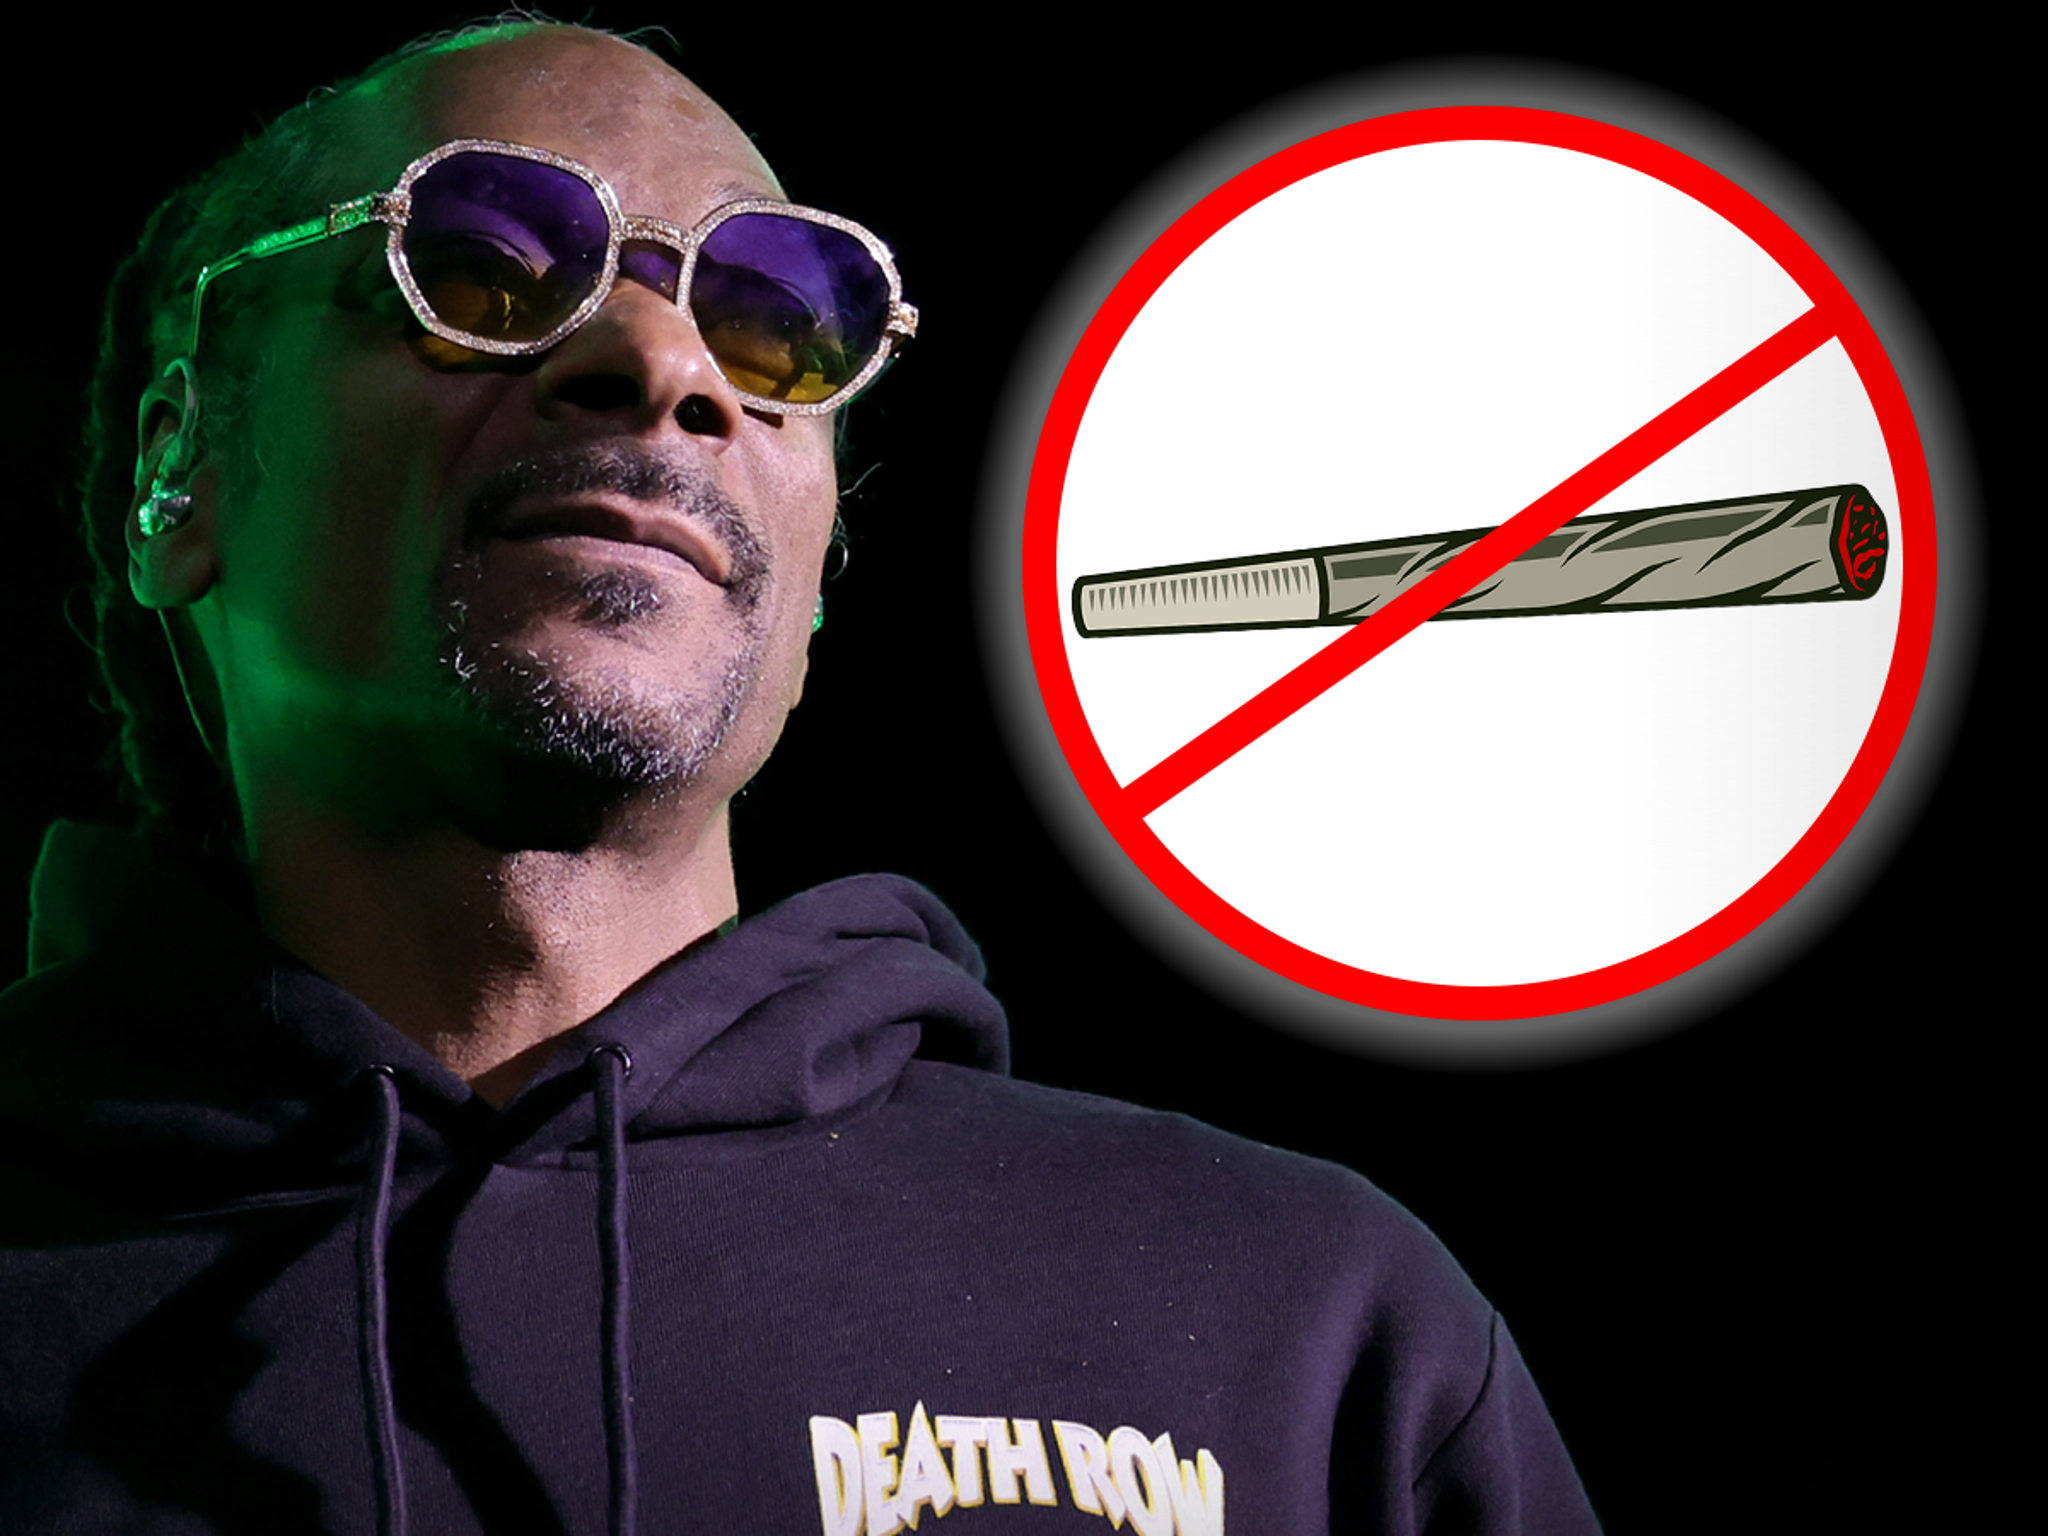 Snoop Dogg's Shift To 'Give Up Smoke' And The Lessons For Leaders